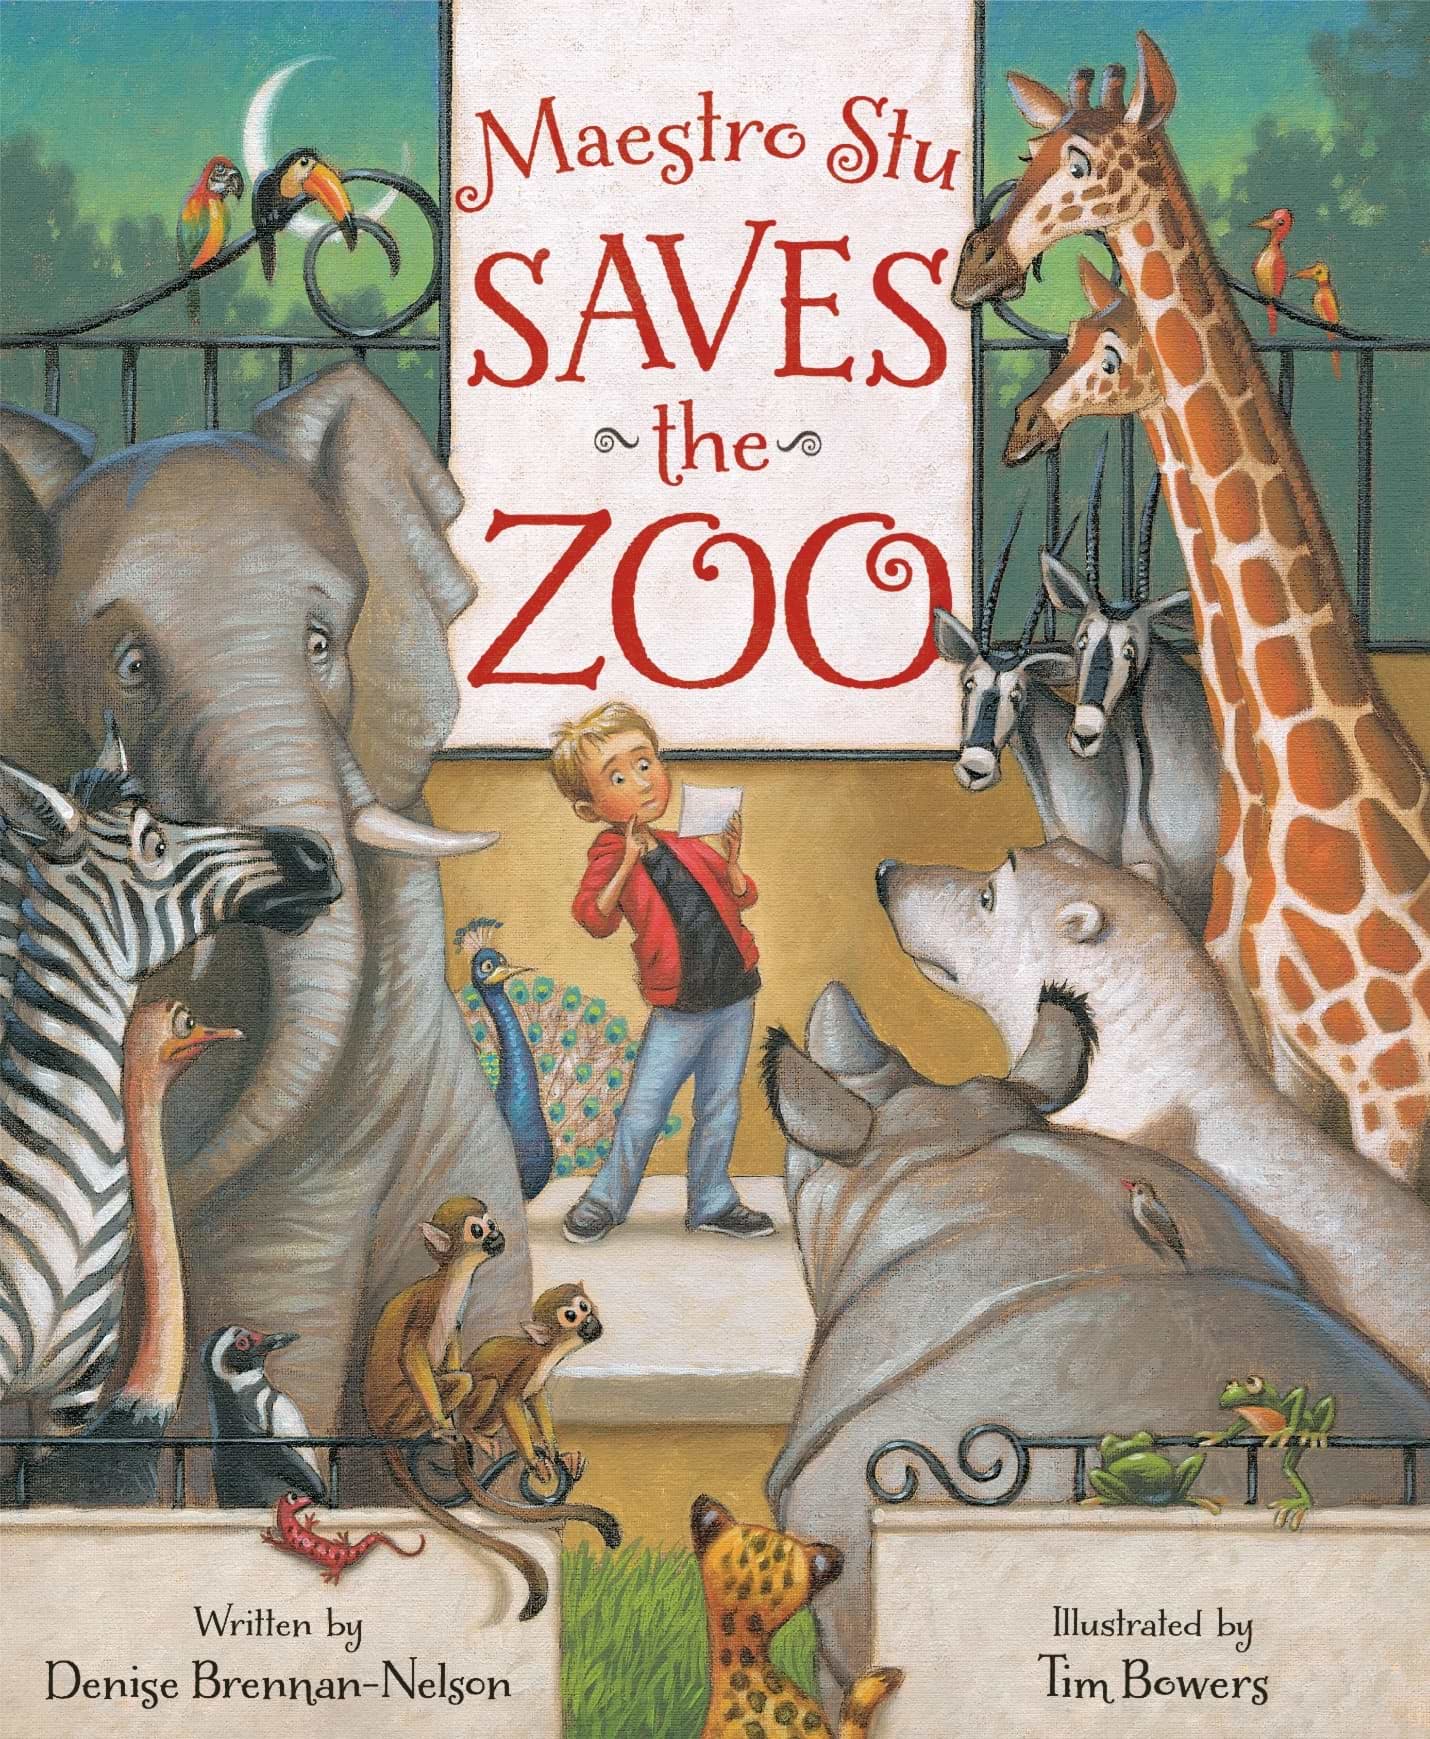 Maestro Stu Saves the Zoo book cover